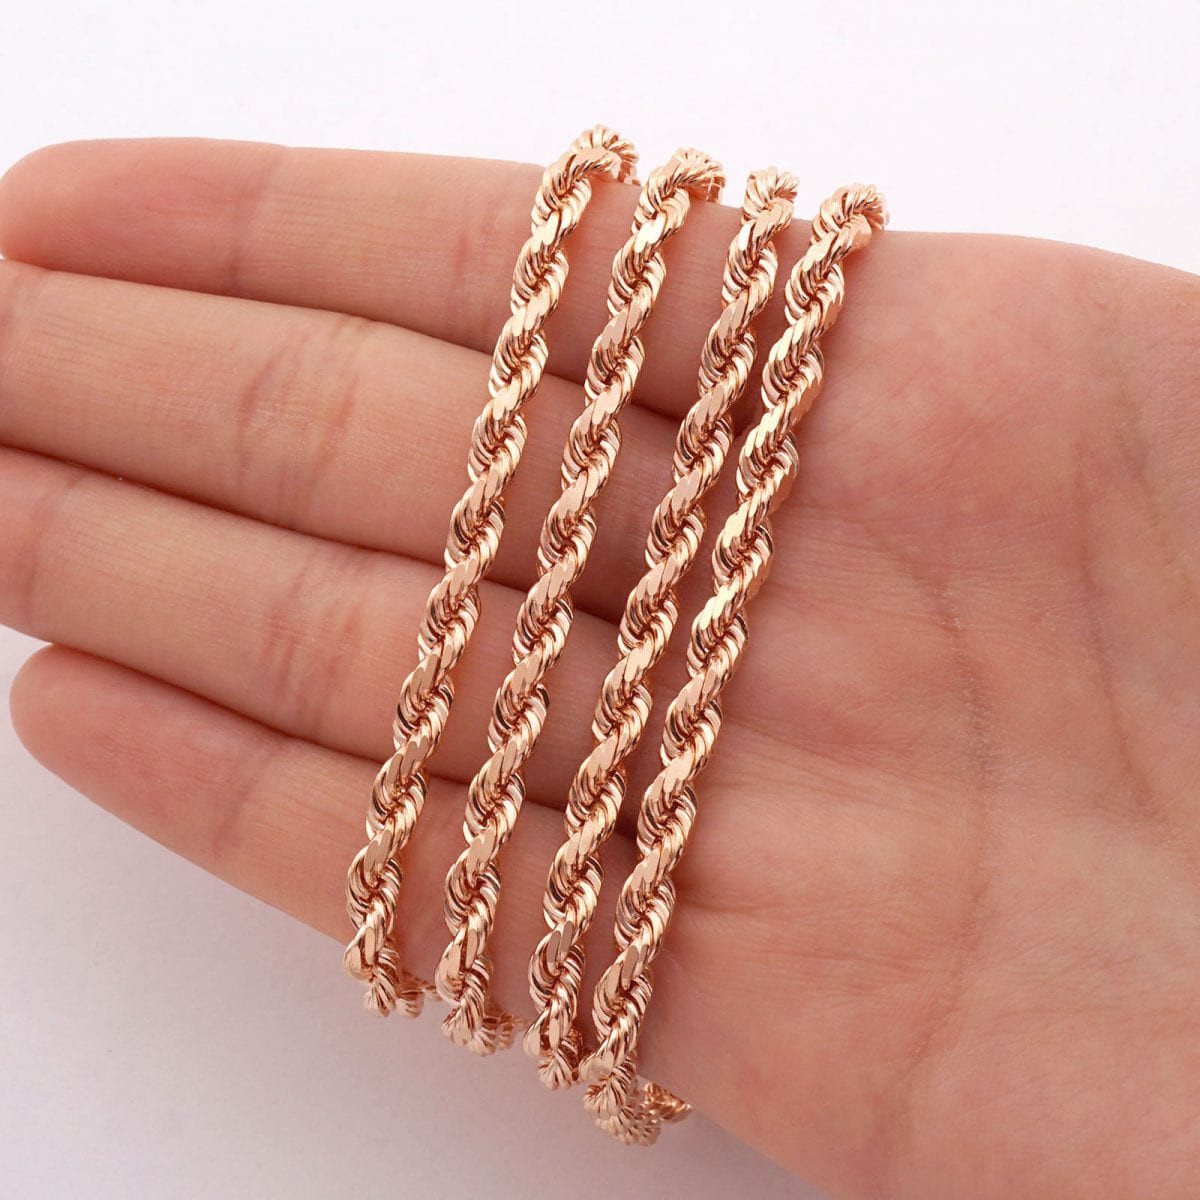 Rose Gold Necklace Chain
 Solid 14k Rose Gold Diamond Cut Rope Chain Necklace 2mm